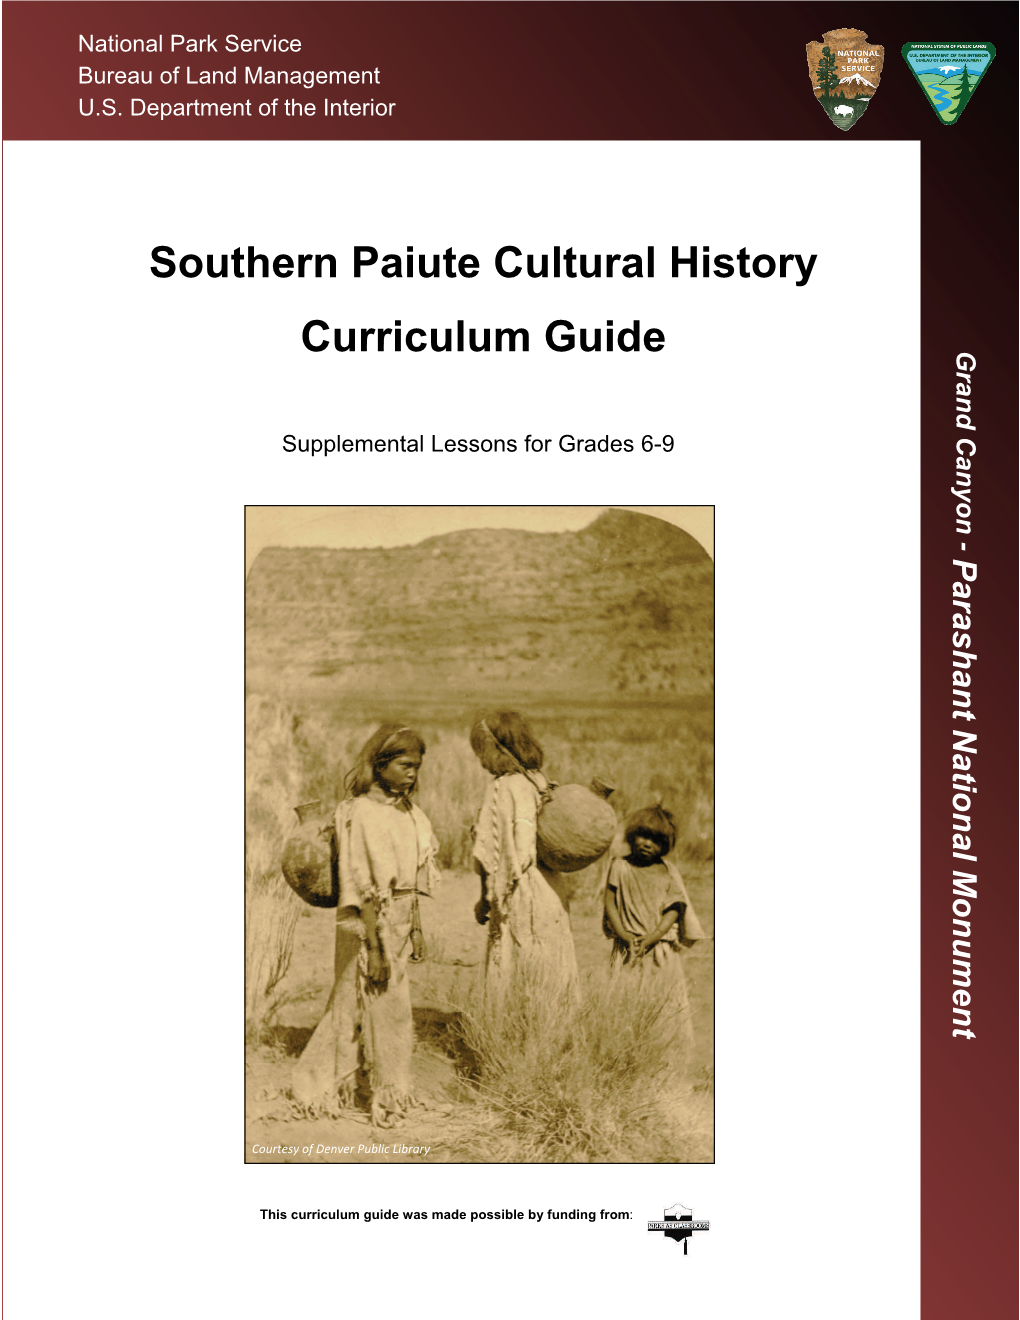 Southern Paiute Cultural History Curriculum Guide